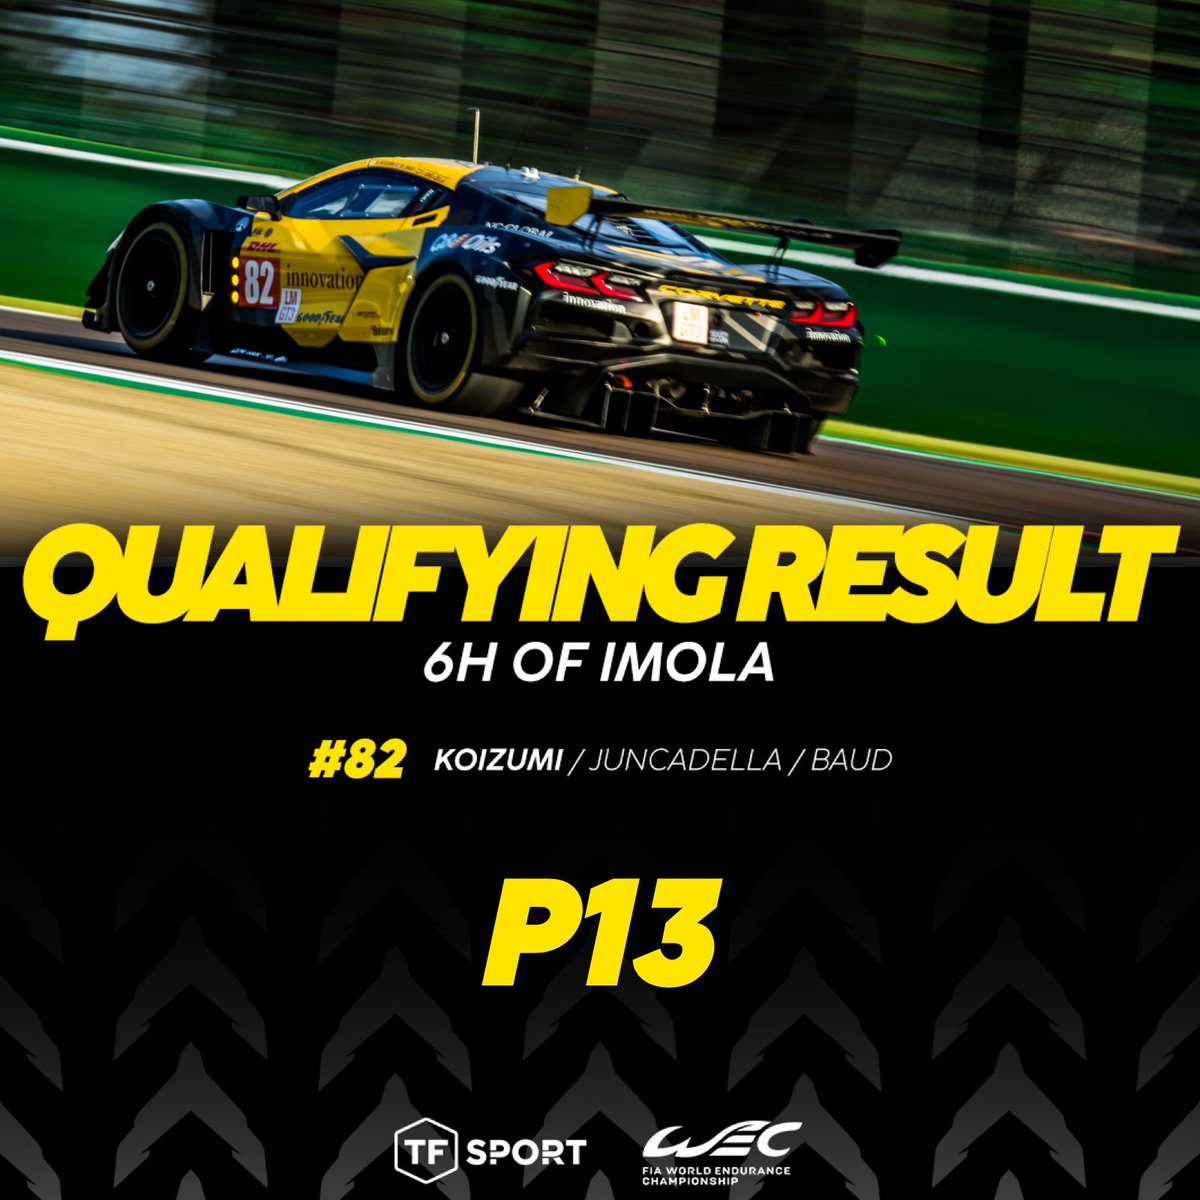 A tough qualifying, but points are scored on Sunday 👀 Qualifying Results: ⚫ #81 LMGT3 ➡️ P11 🟡 #82 LMGT3 ➡️ P13 Now that the grid is set, all we have to do is prepare for the #6HImola tomorrow and put all our focus on the race 👊🏁 #TFSport #WEC #6hImola #TeamChevy